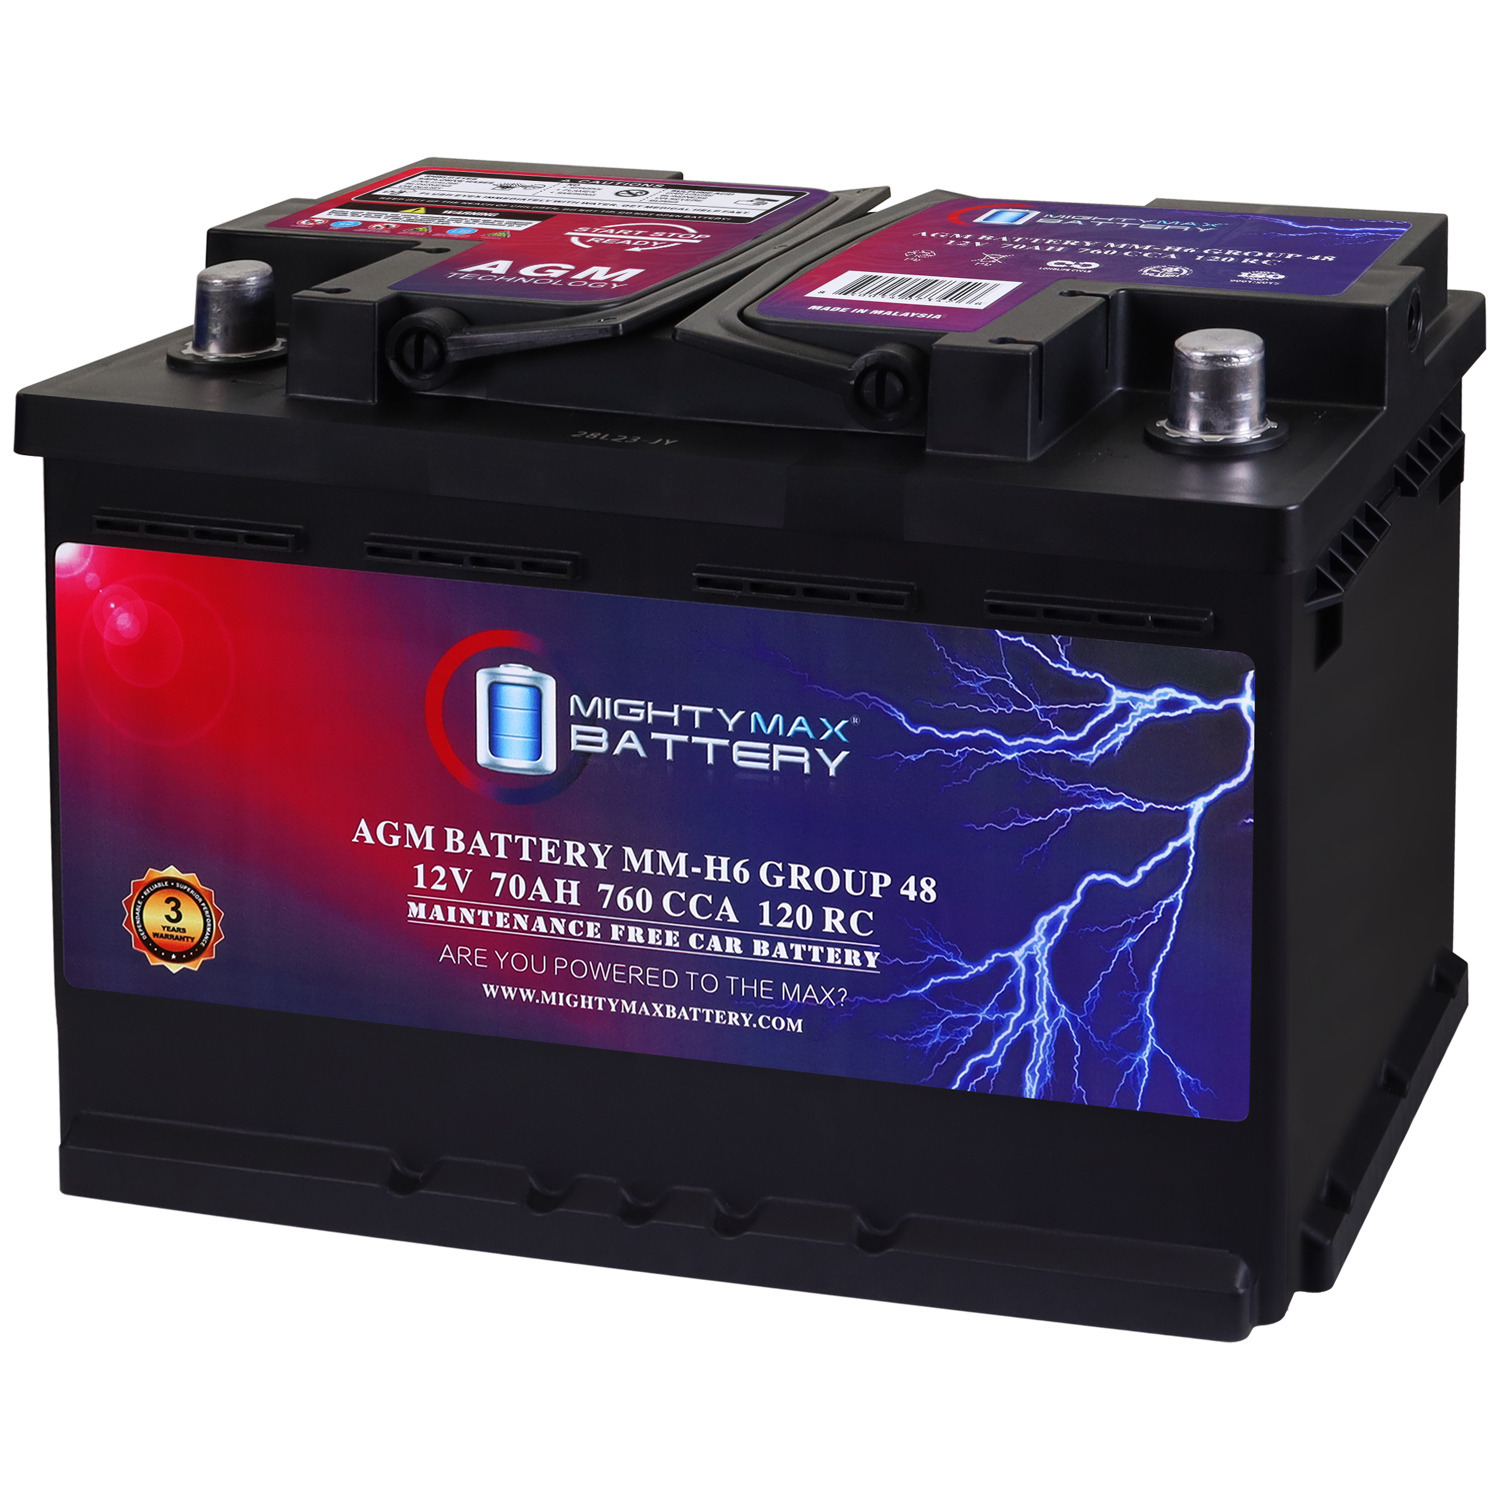 MM-H6 Group 48 12V 70AH 120RC 760CCA Replacement Battery Compatible with Volkswagen Beetle 98-19